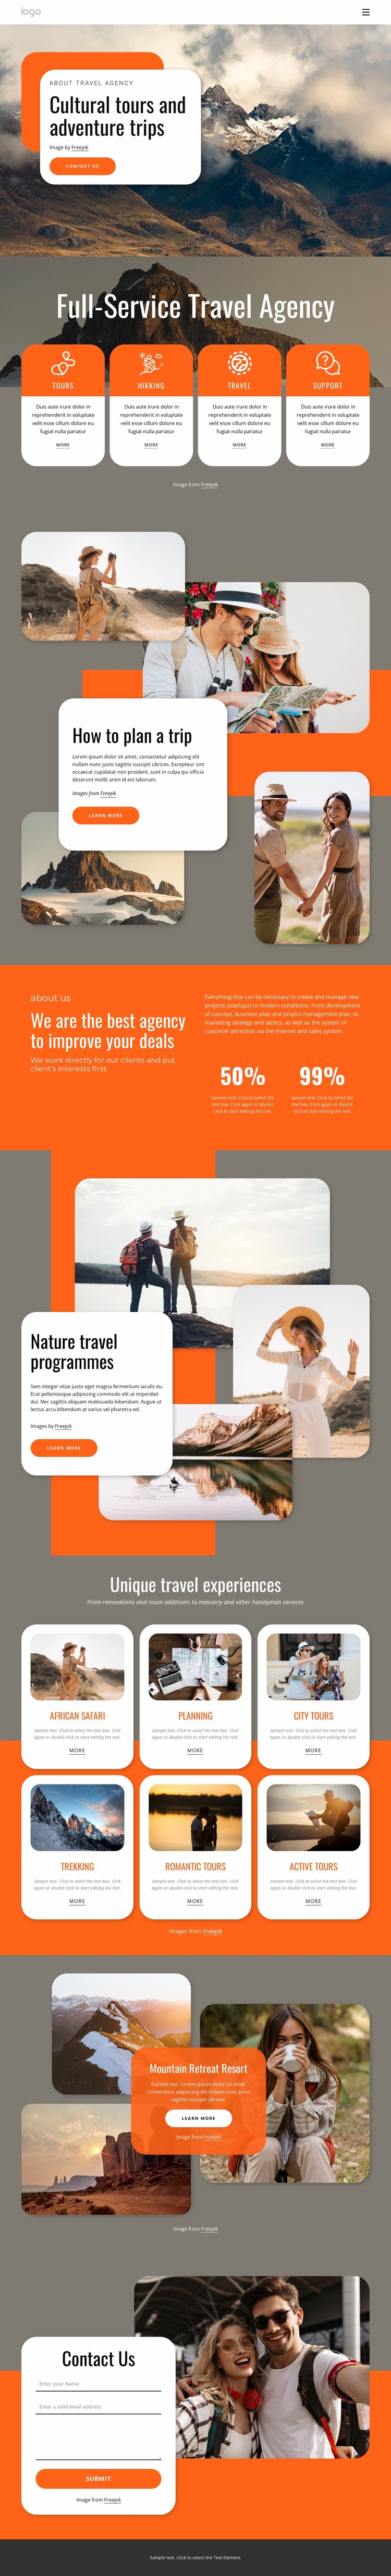 Group travel for all ages Website Mockup